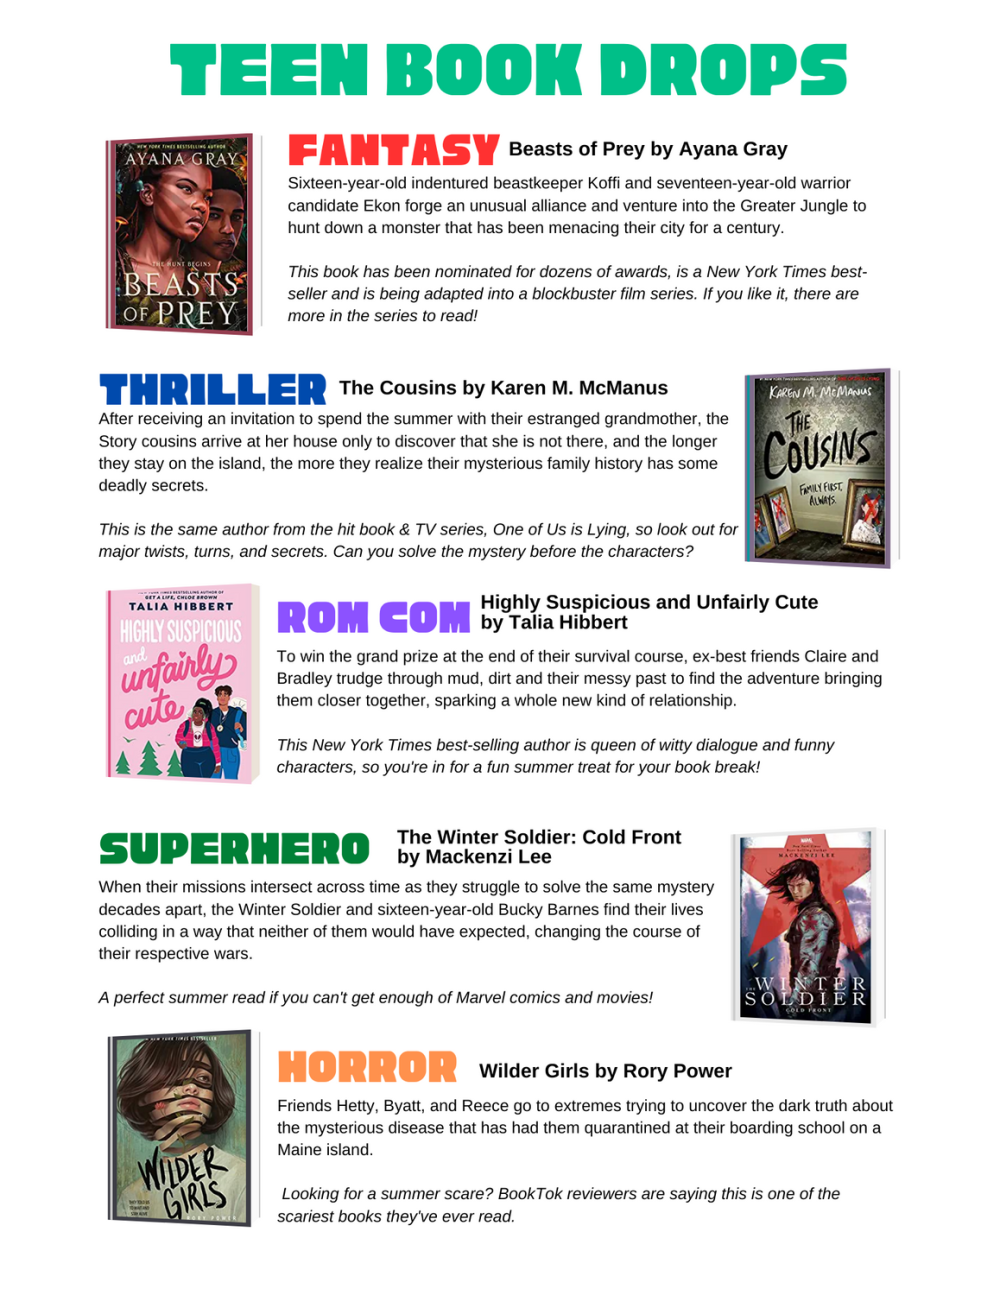 Beasts of Prey by Ayana Gray, The Cousins by Karen M. McManus, Highly Suspicious and Unfairly Cute  by Talia Hibbert, The Winter Soldier: Cold Front  by Mackenzi Lee, Wilder Girls by Rory Power